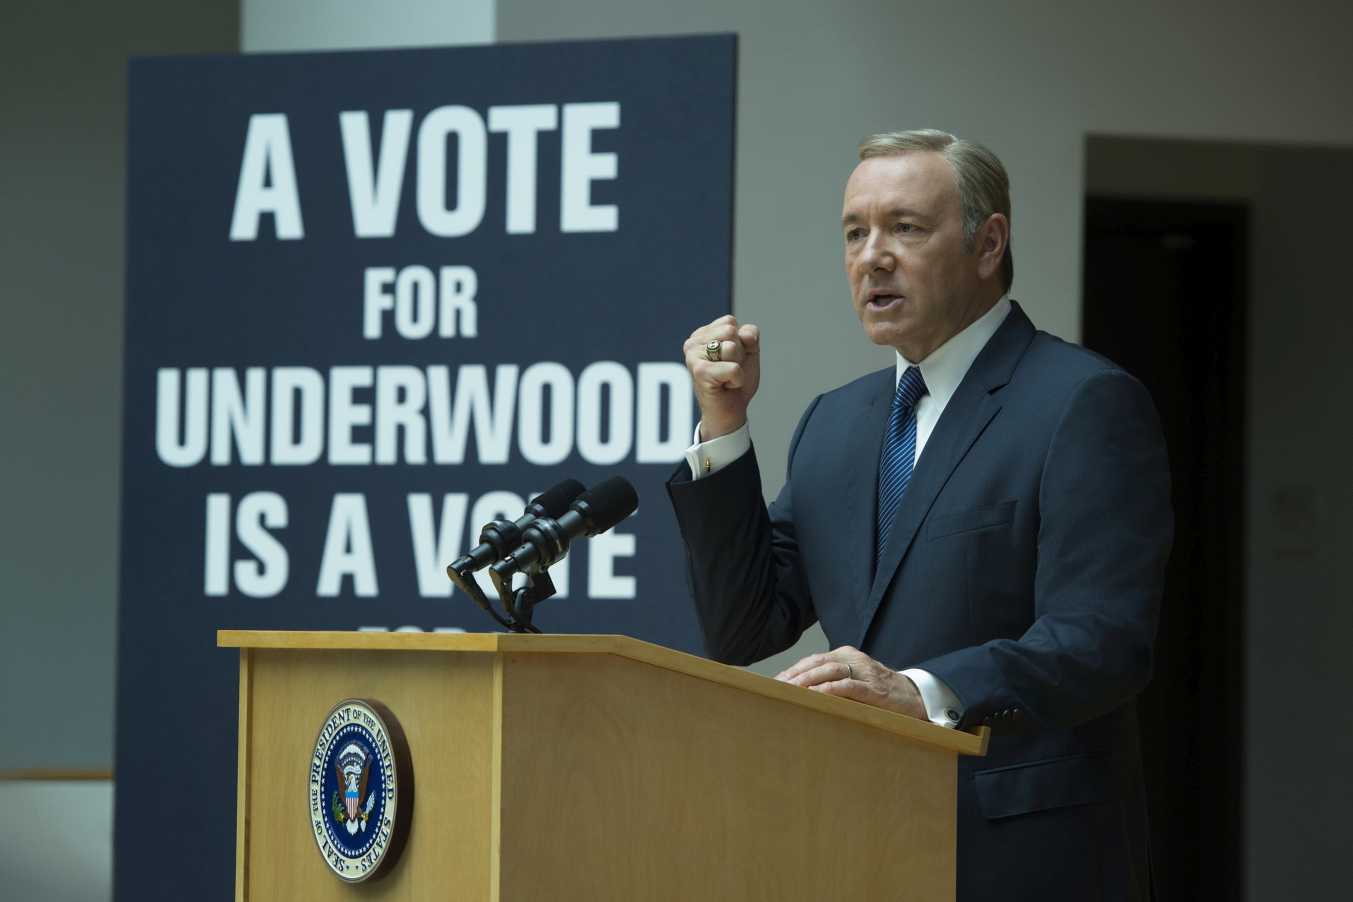 House of cards season 4 release date